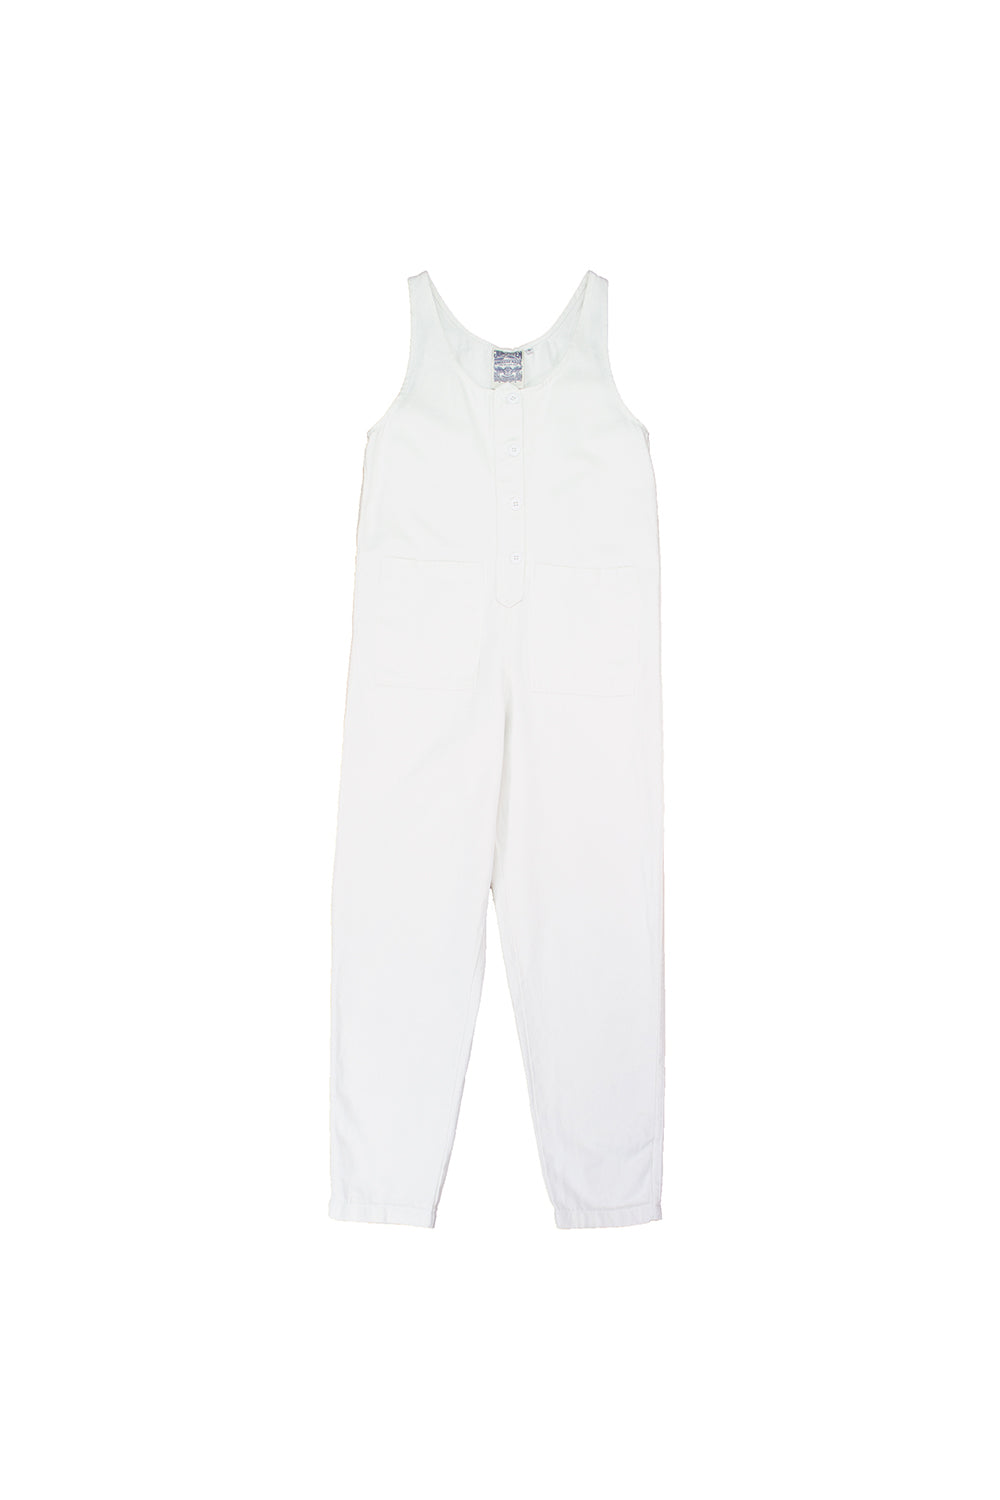 Button Front Jumper | Jungmaven Hemp Clothing & Accessories / Color: Washed White